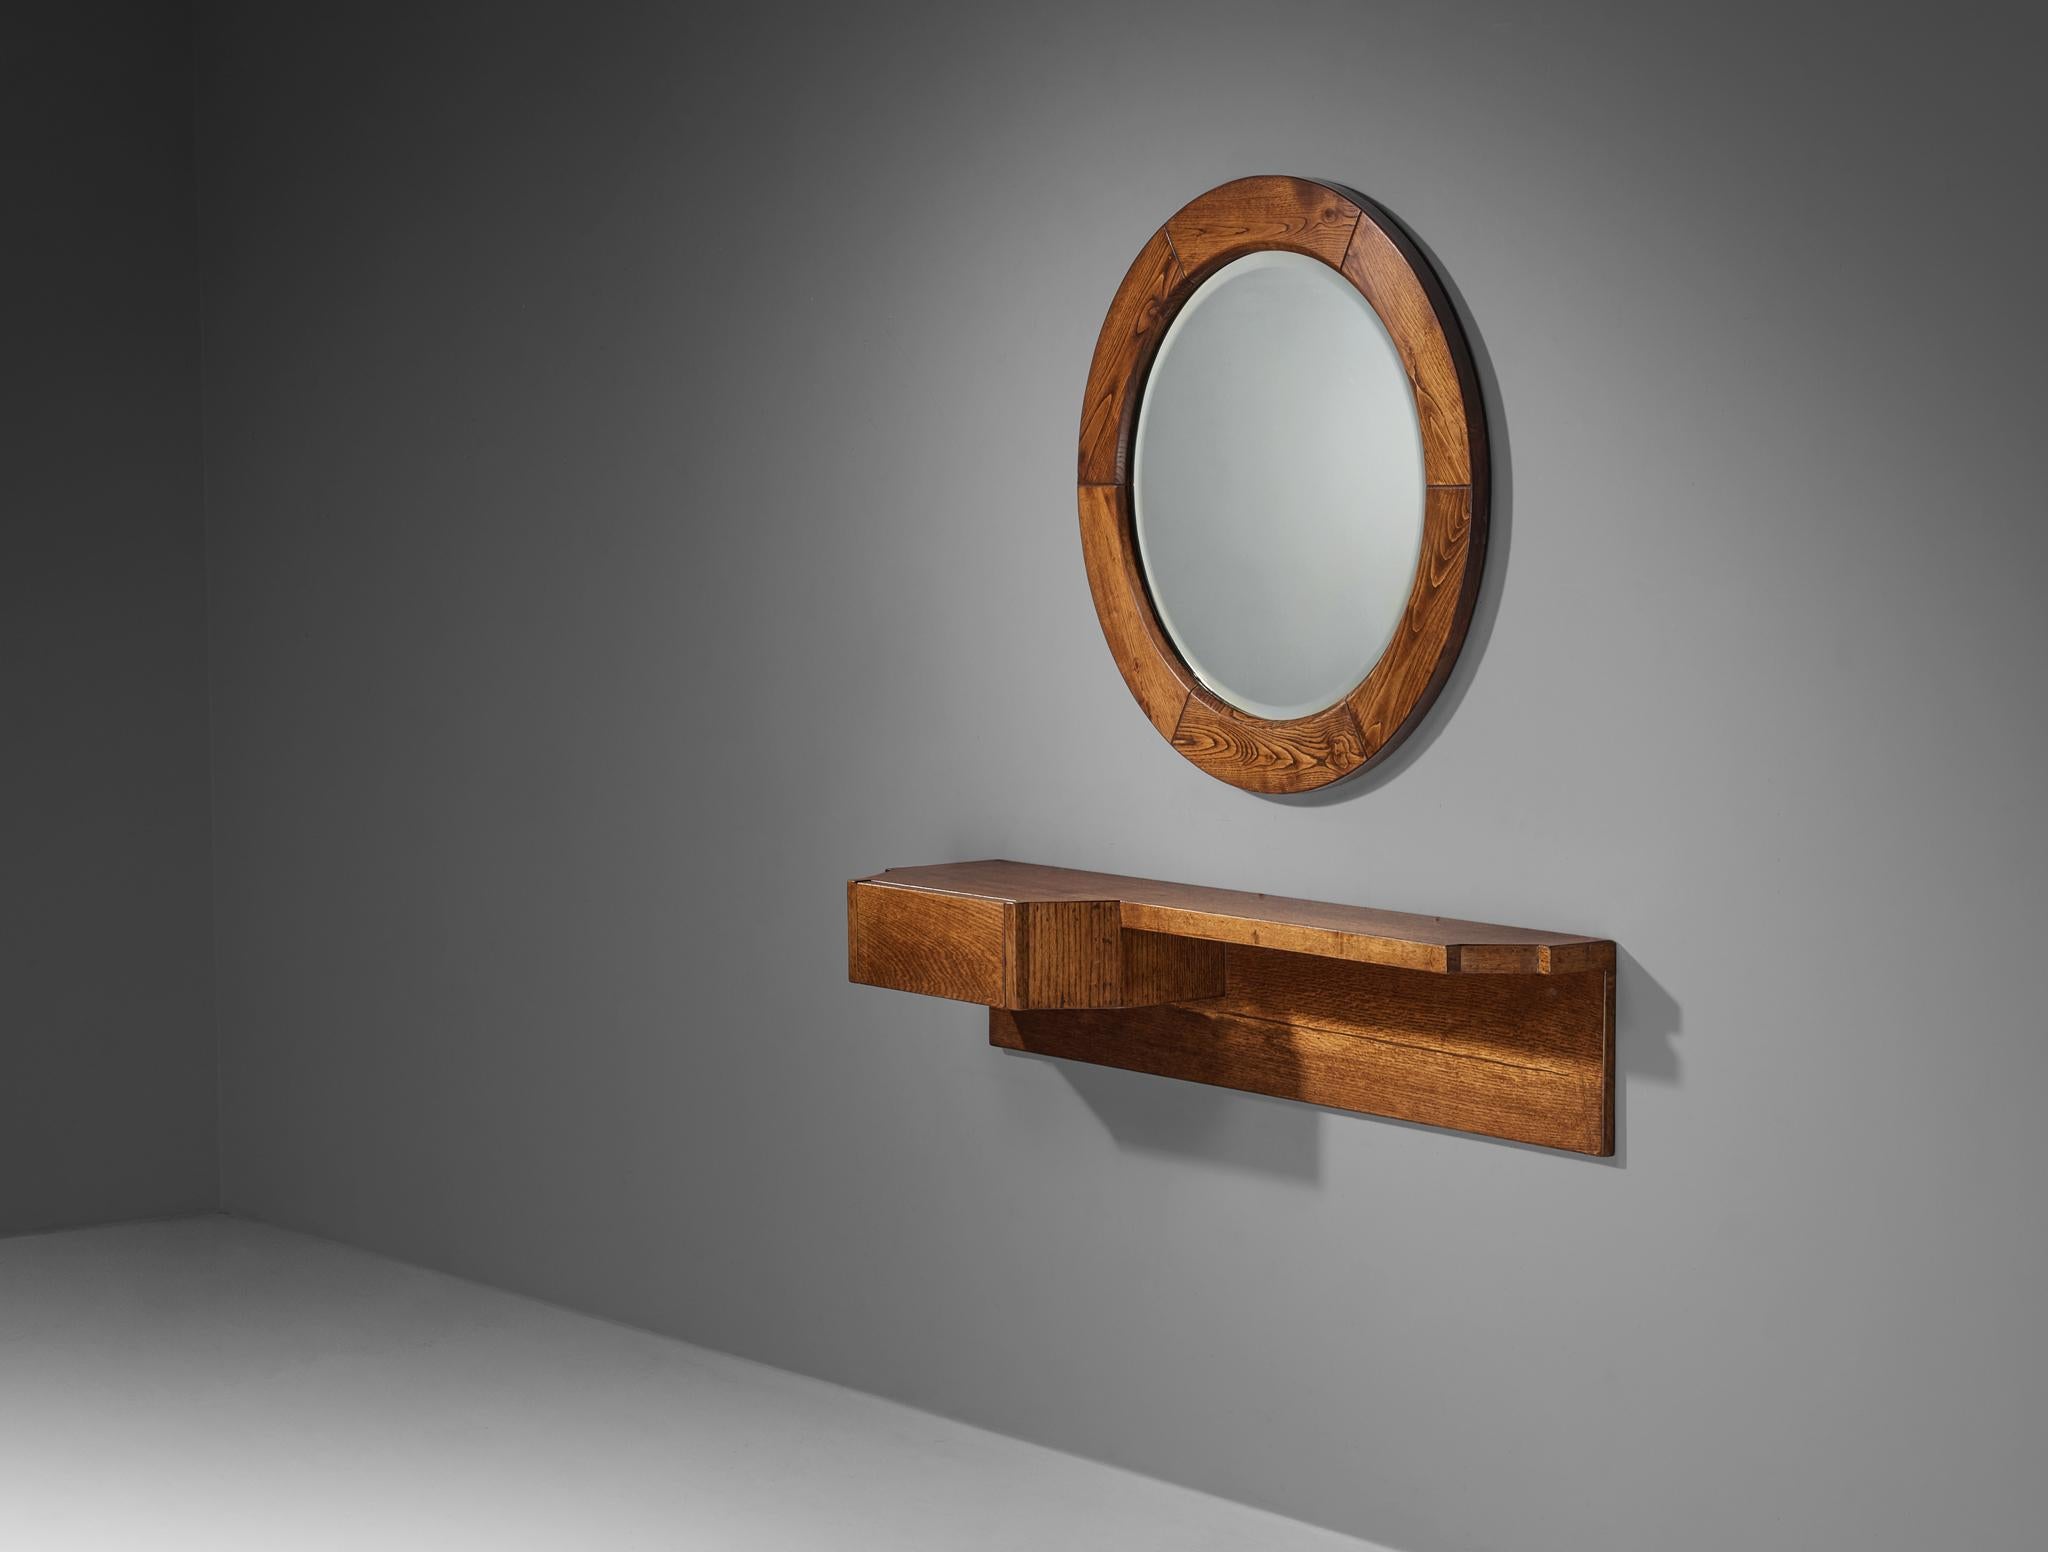 Giuseppe Rivadossi, wall-mounted console with mirror, oak, mirrored glass, Italy, 1970s

This stunning ensemble comprises a wall-mounted cabinet and a matching mirror, both designed by Italian sculptor and designer Giuseppe Rivadossi. The design